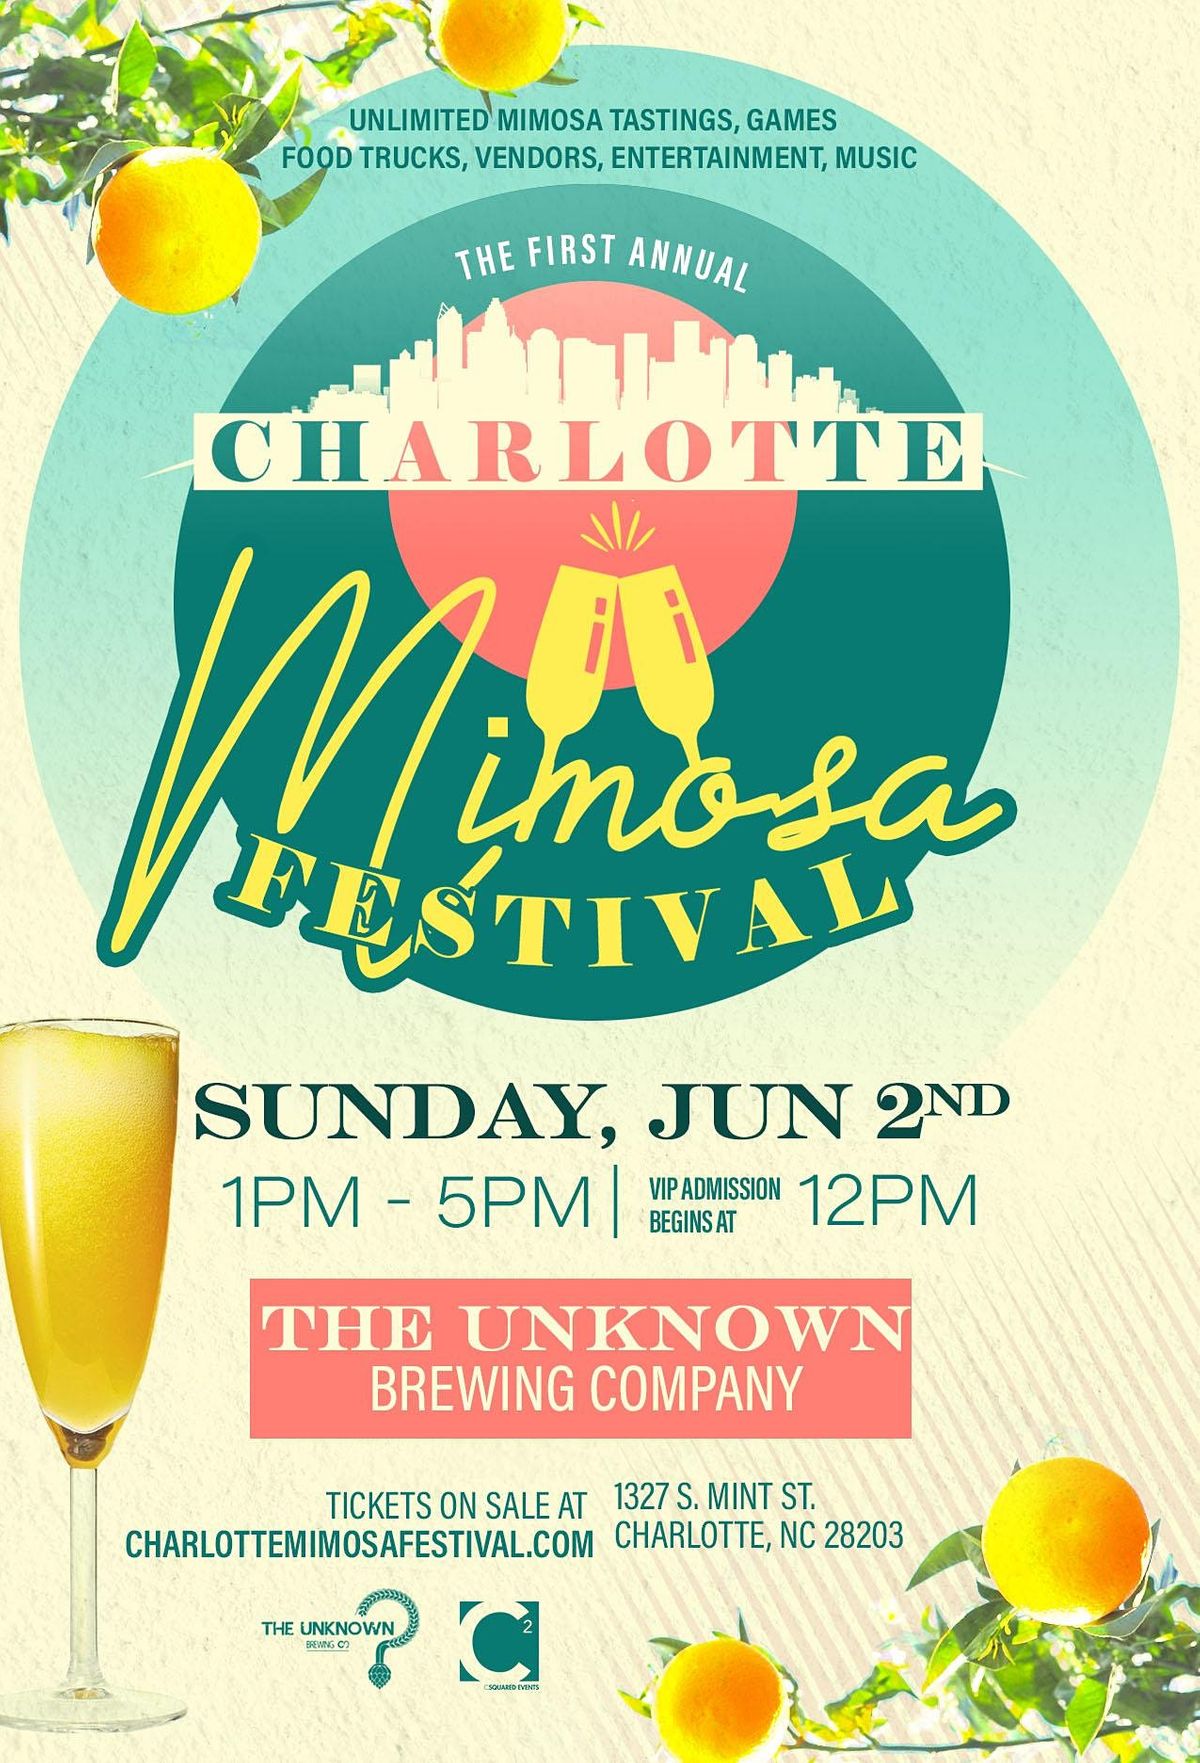 Charlotte Mimosa Festival 2021 presented by Crown Point Kitchens